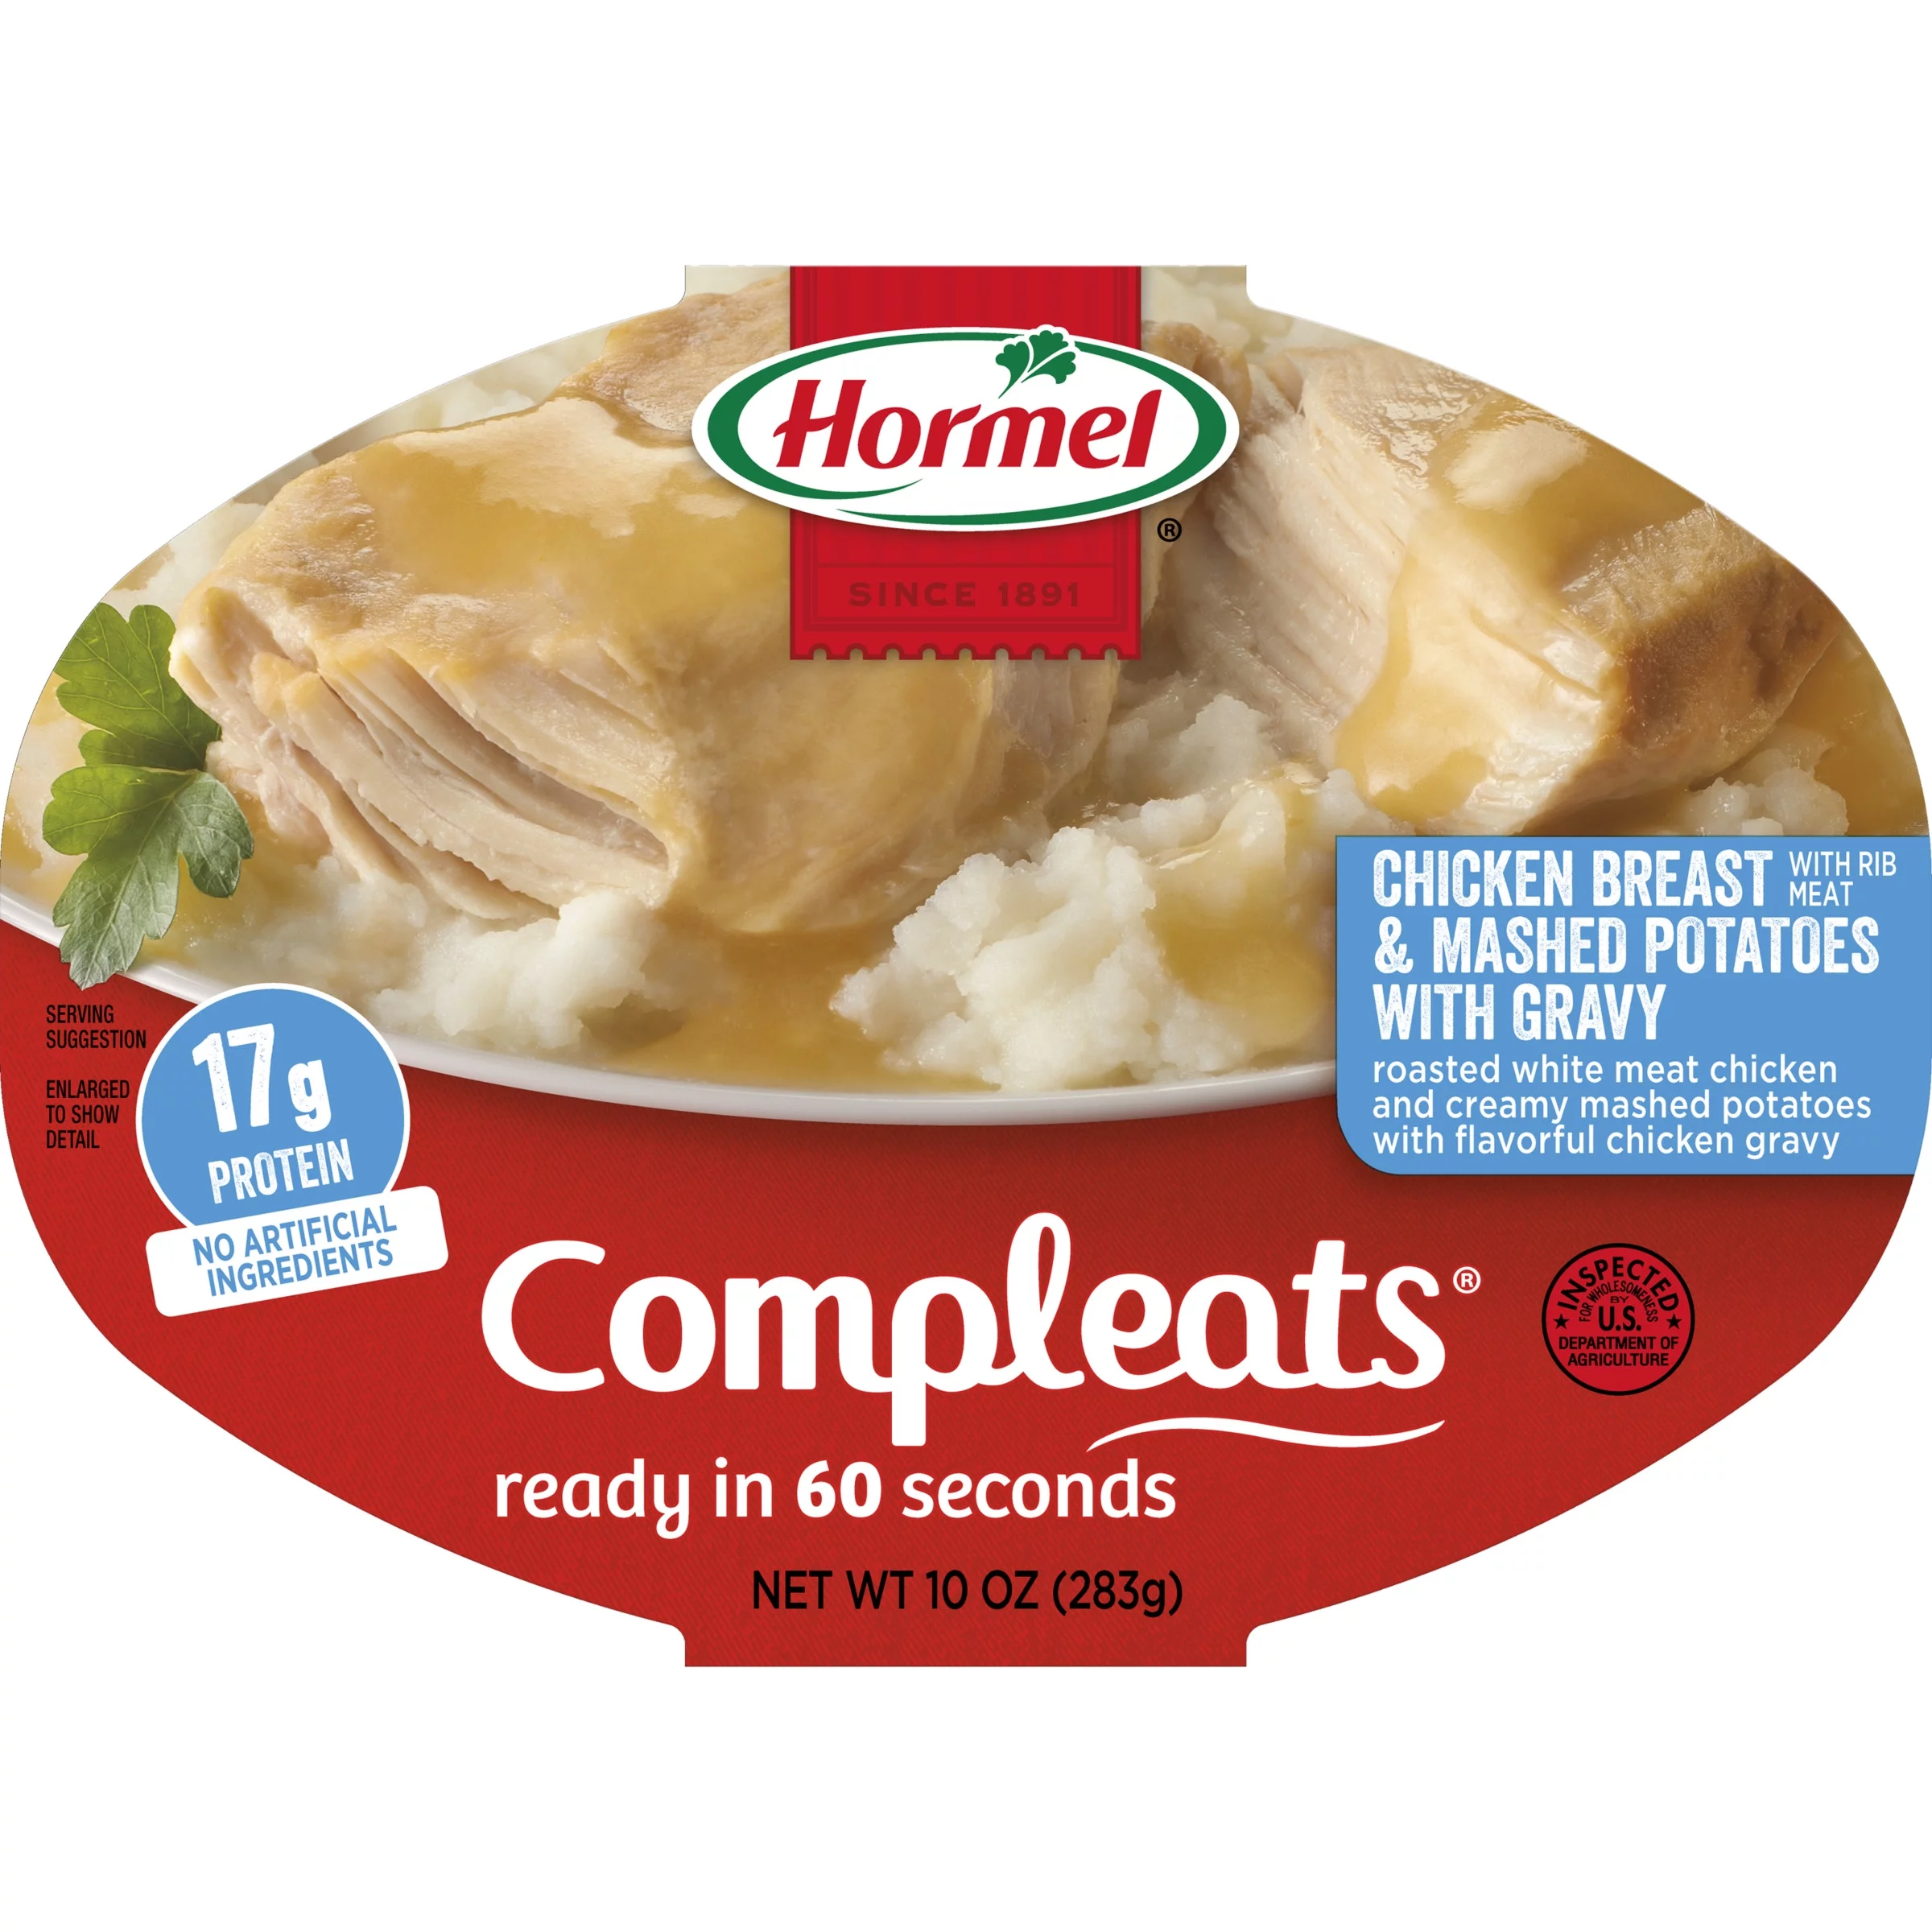 HORMEL COMPLEATS Chicken Breast with Gravy & Mashed Potatoes, Shelf Stable, 10 oz Plastic Tray